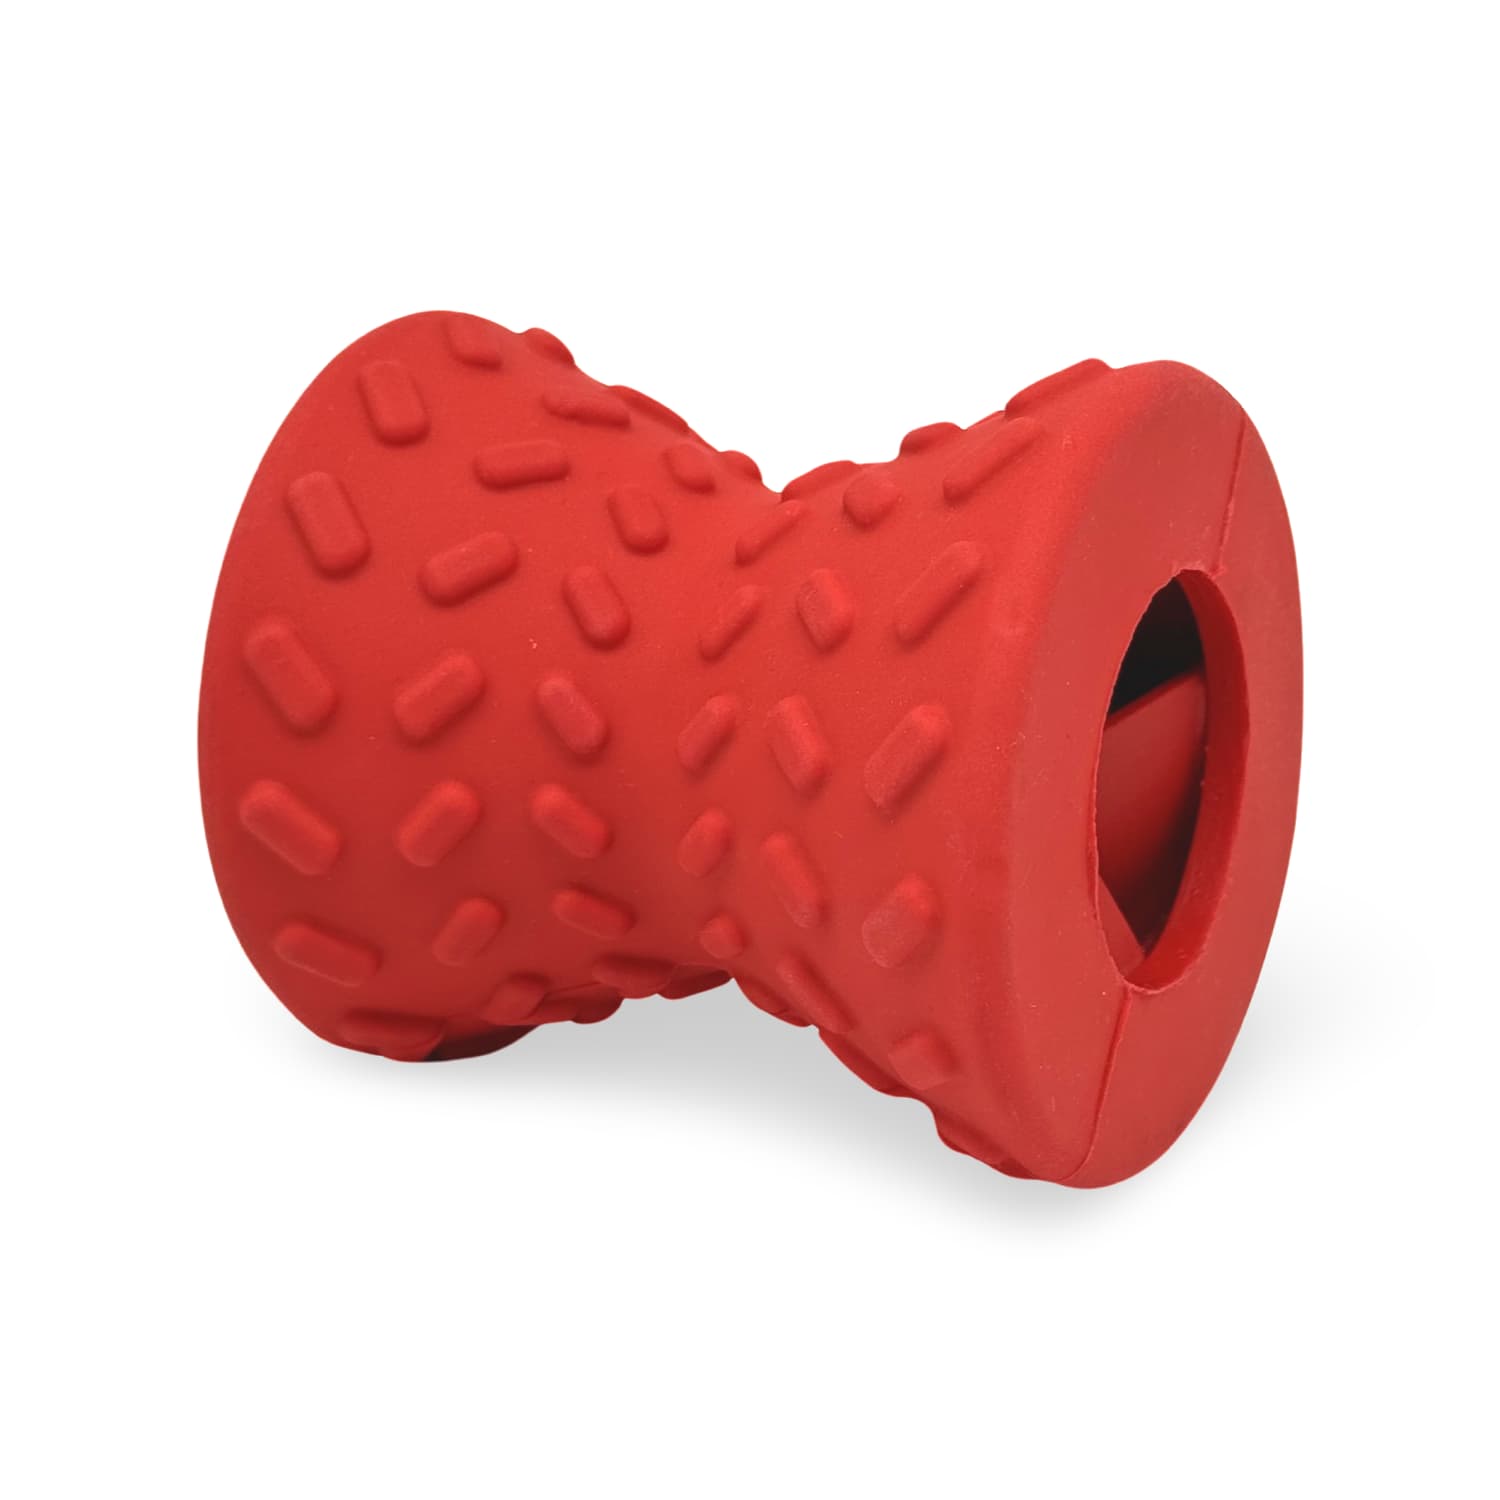 Red Rubber Two Way Dog Toy Treat Dispenser with Spiral Fins